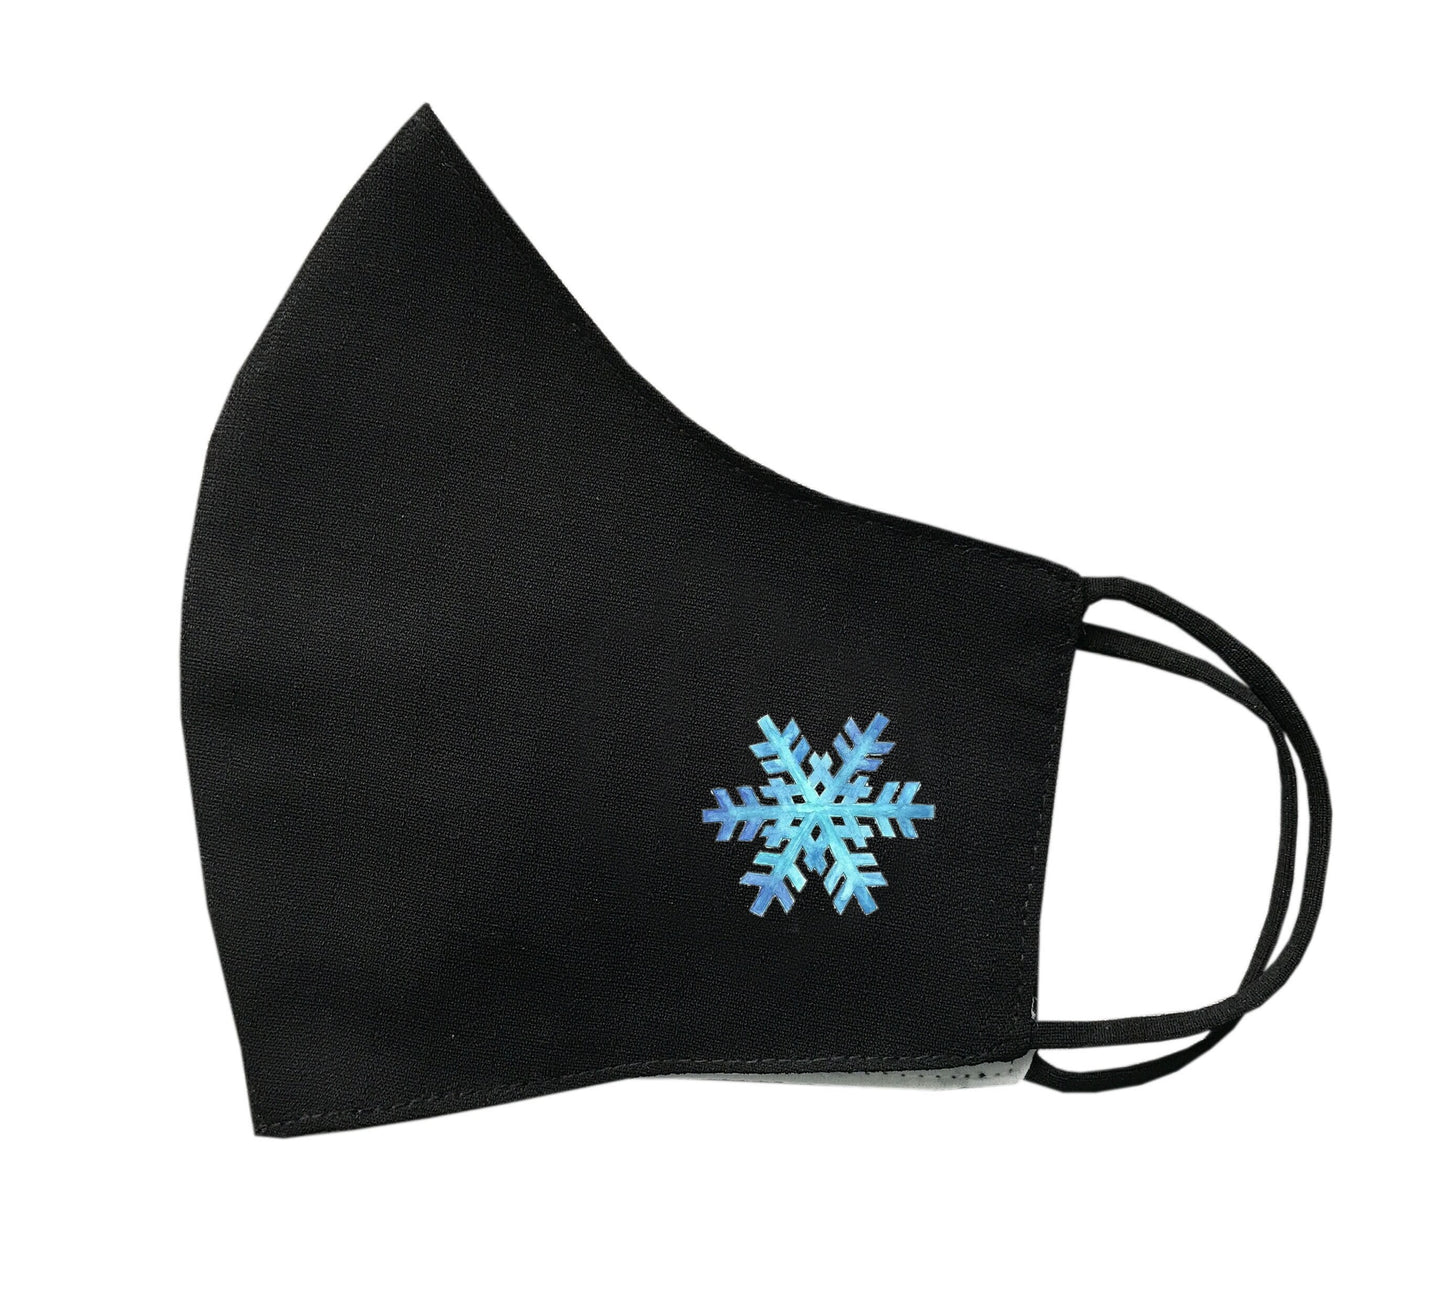 Snow Flake Face Mask Protective Covering Washable Reusable Breathable perfect Christmas Gift